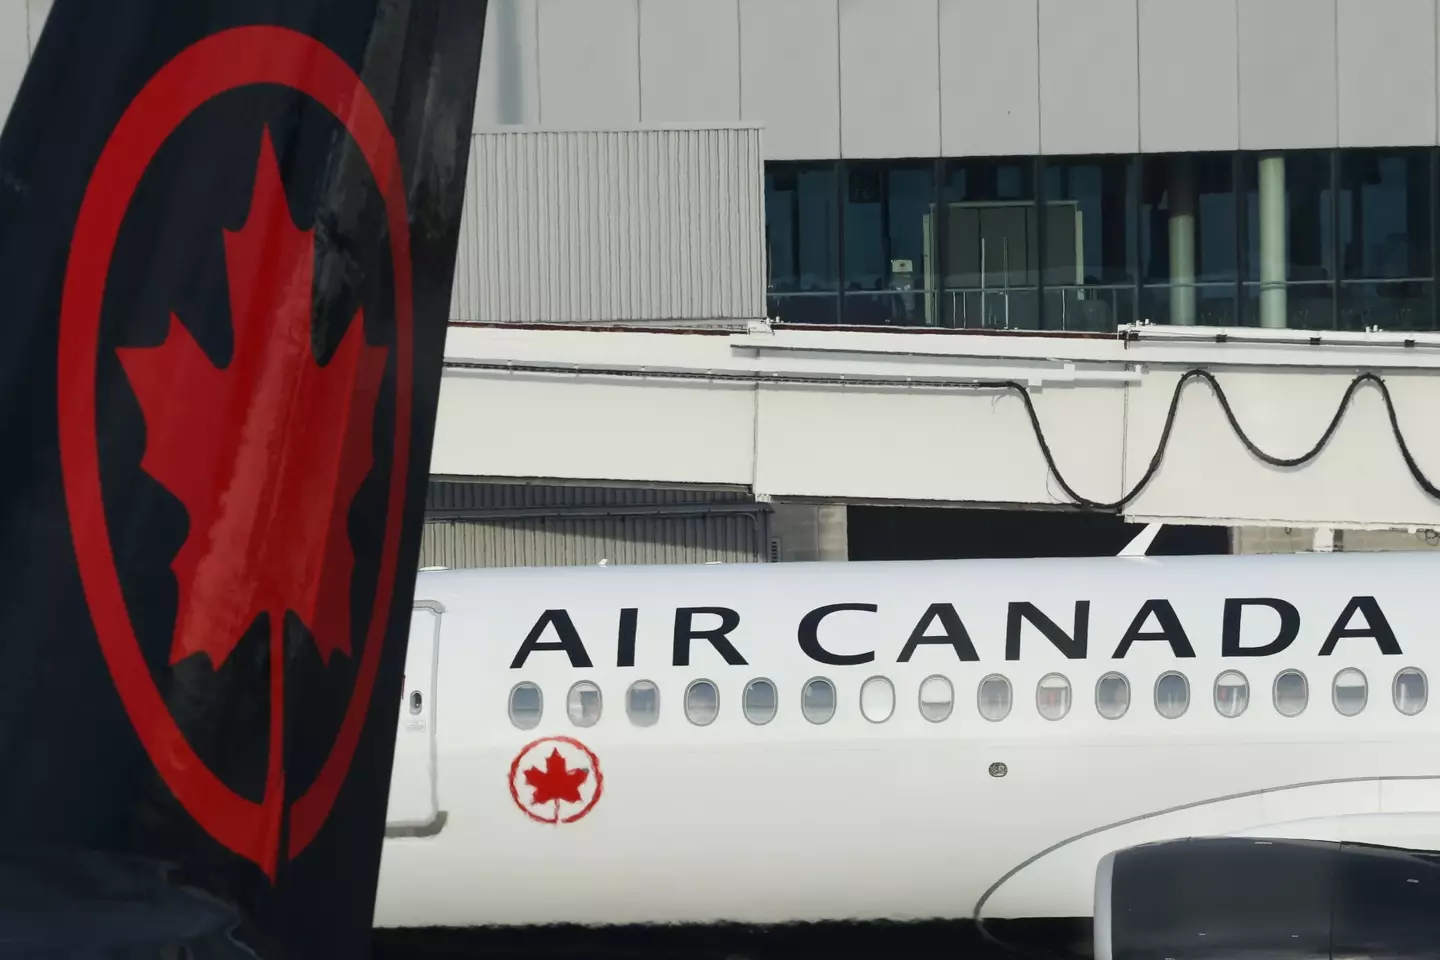 A couple said Air Canada failed to provide a wheelchair for a disabled man, meaning he had to drag himself off their plane.